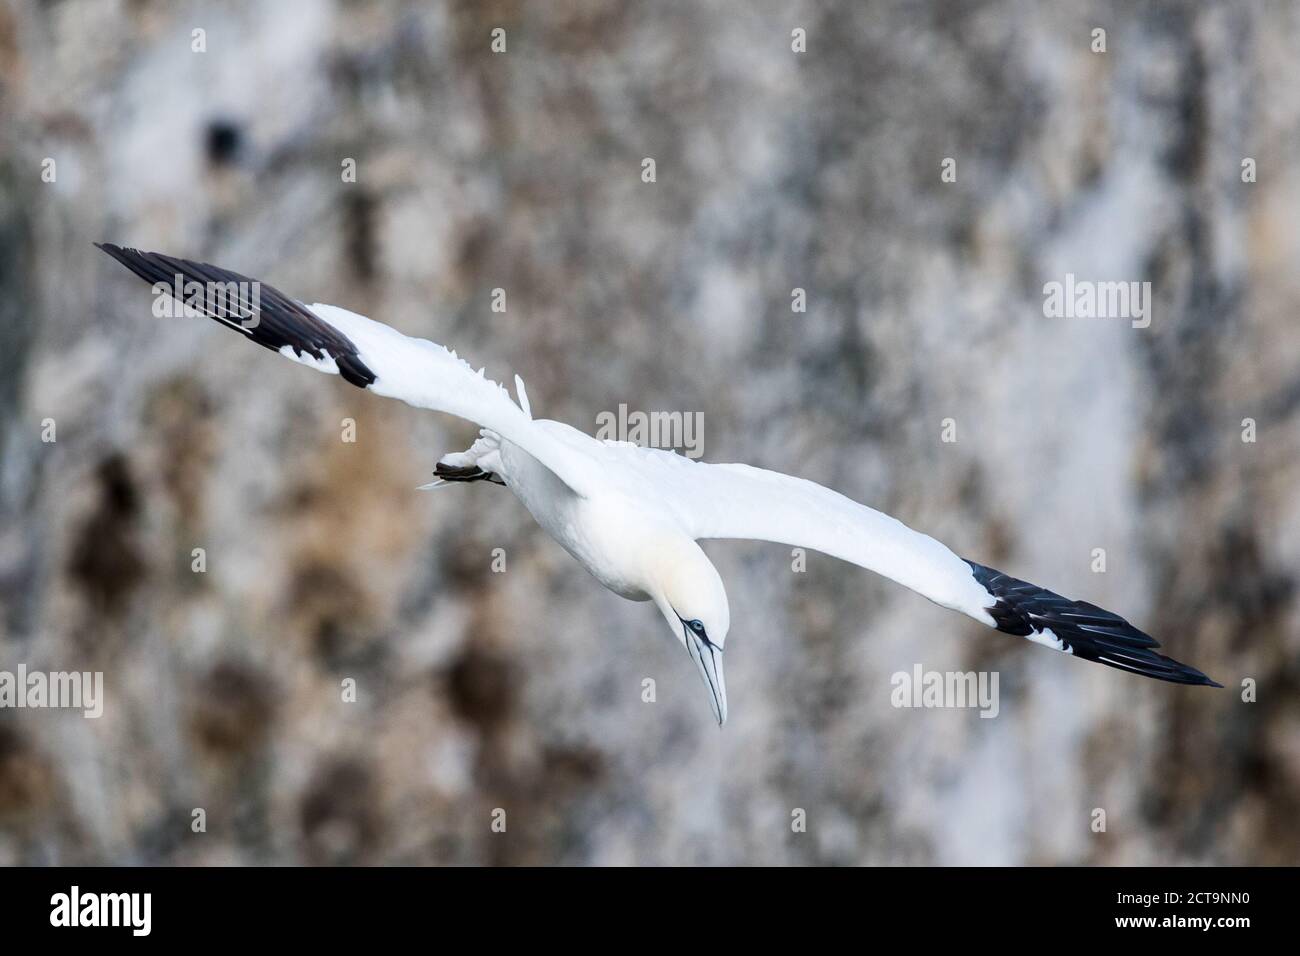 Northern gannet swooping at Bempton Cliffs in Yorkshire. Stock Photo